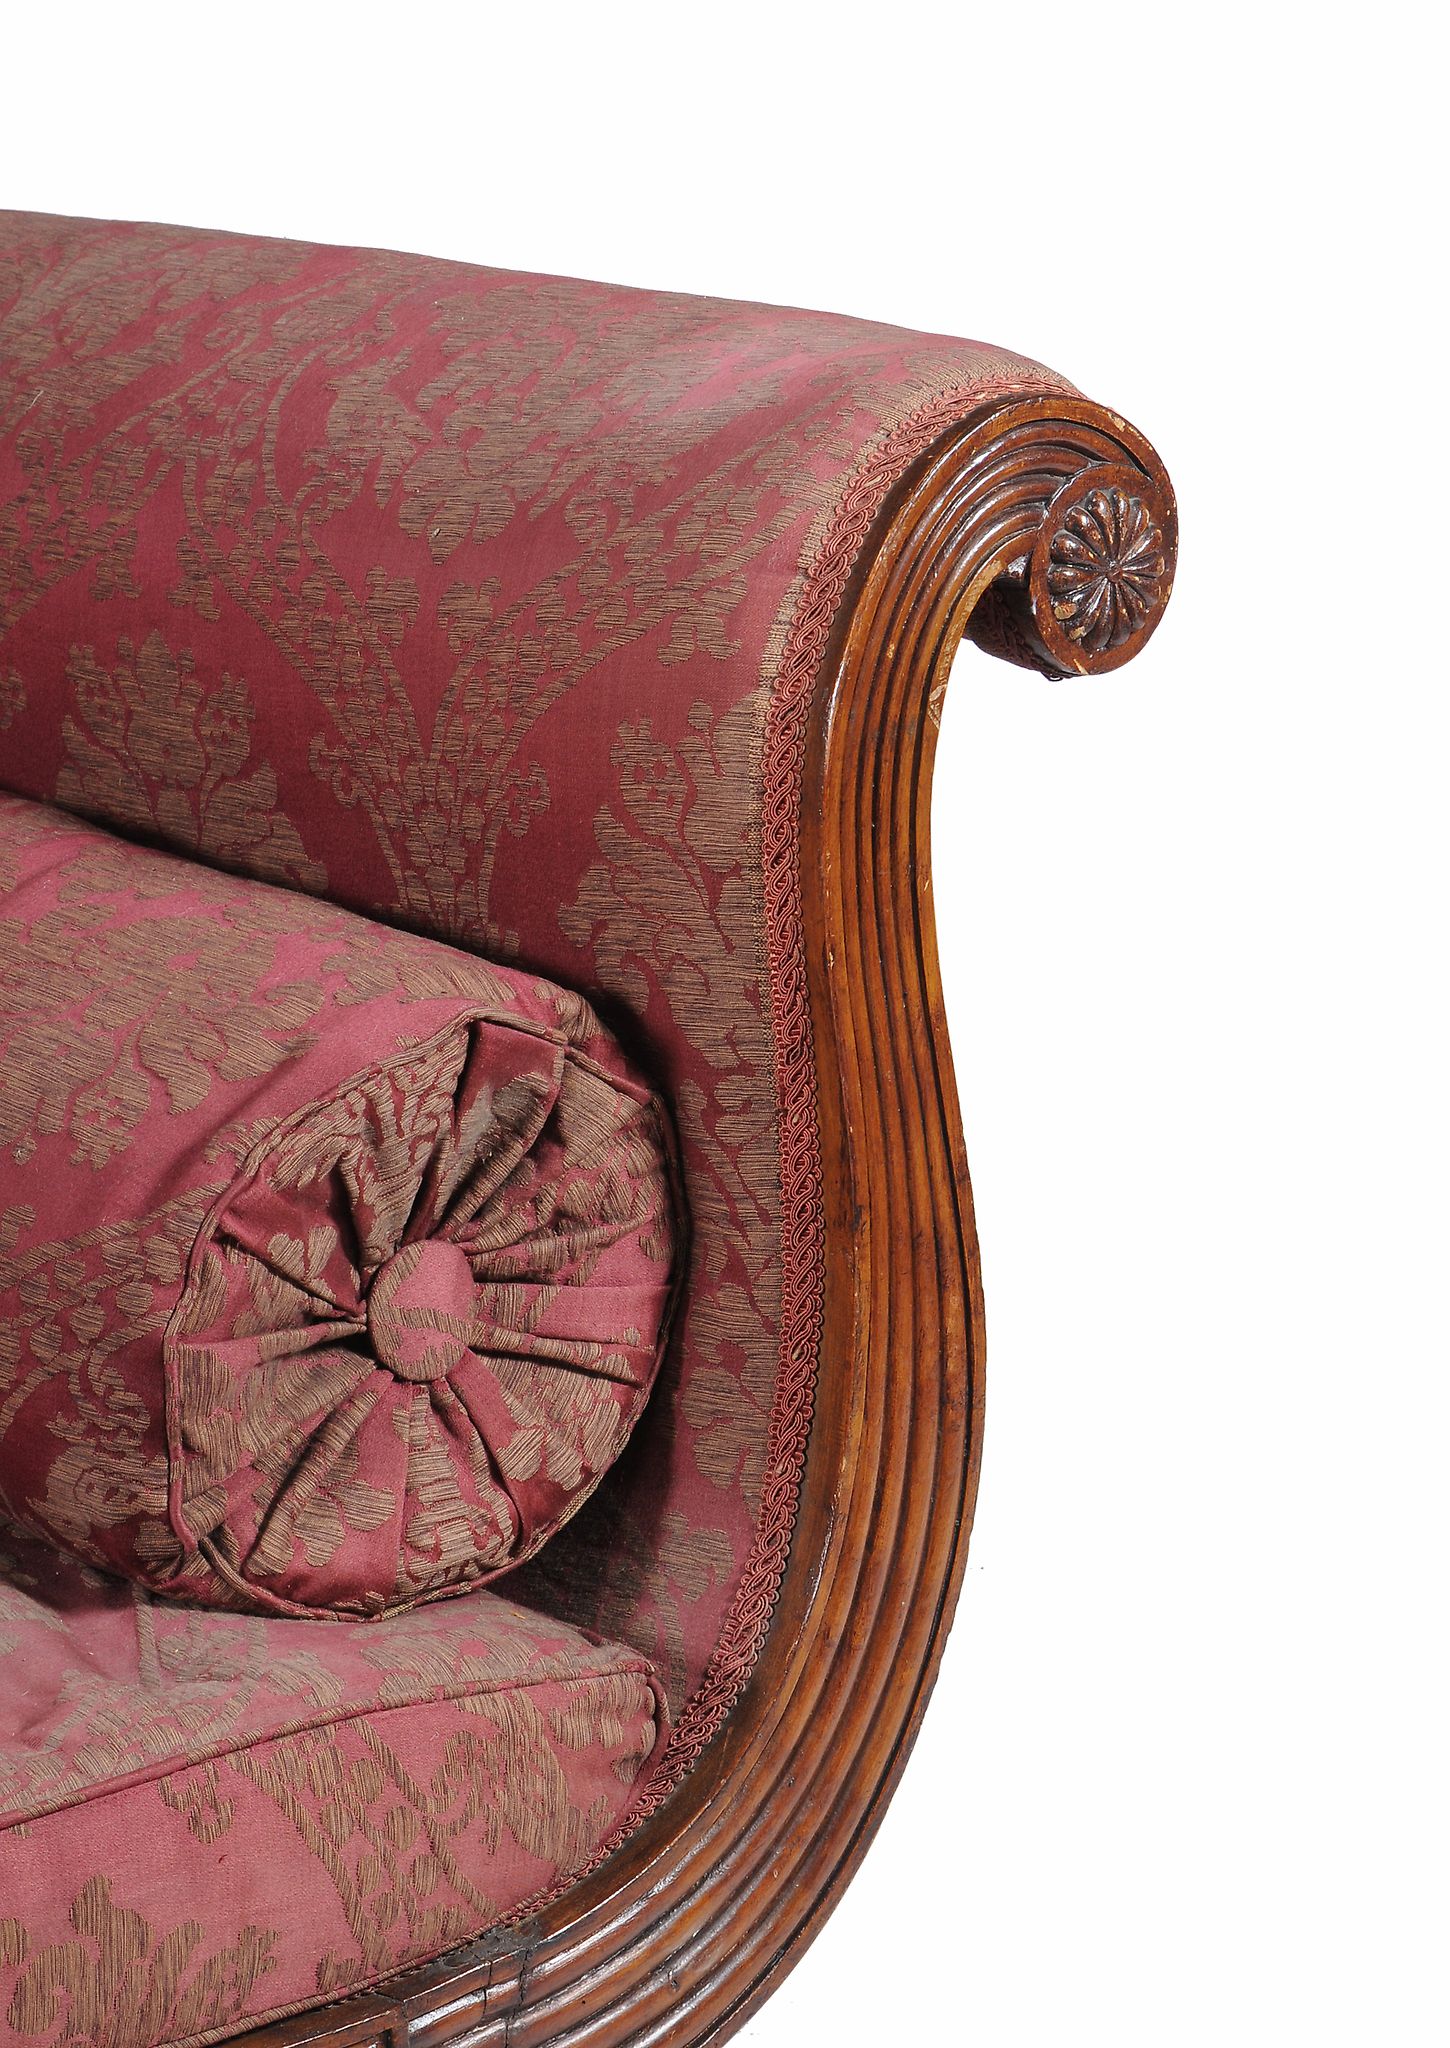 A George IV mahogany chaise longue , circa 1825, in the manner of Gillows, with scrolled ends and - Image 3 of 3